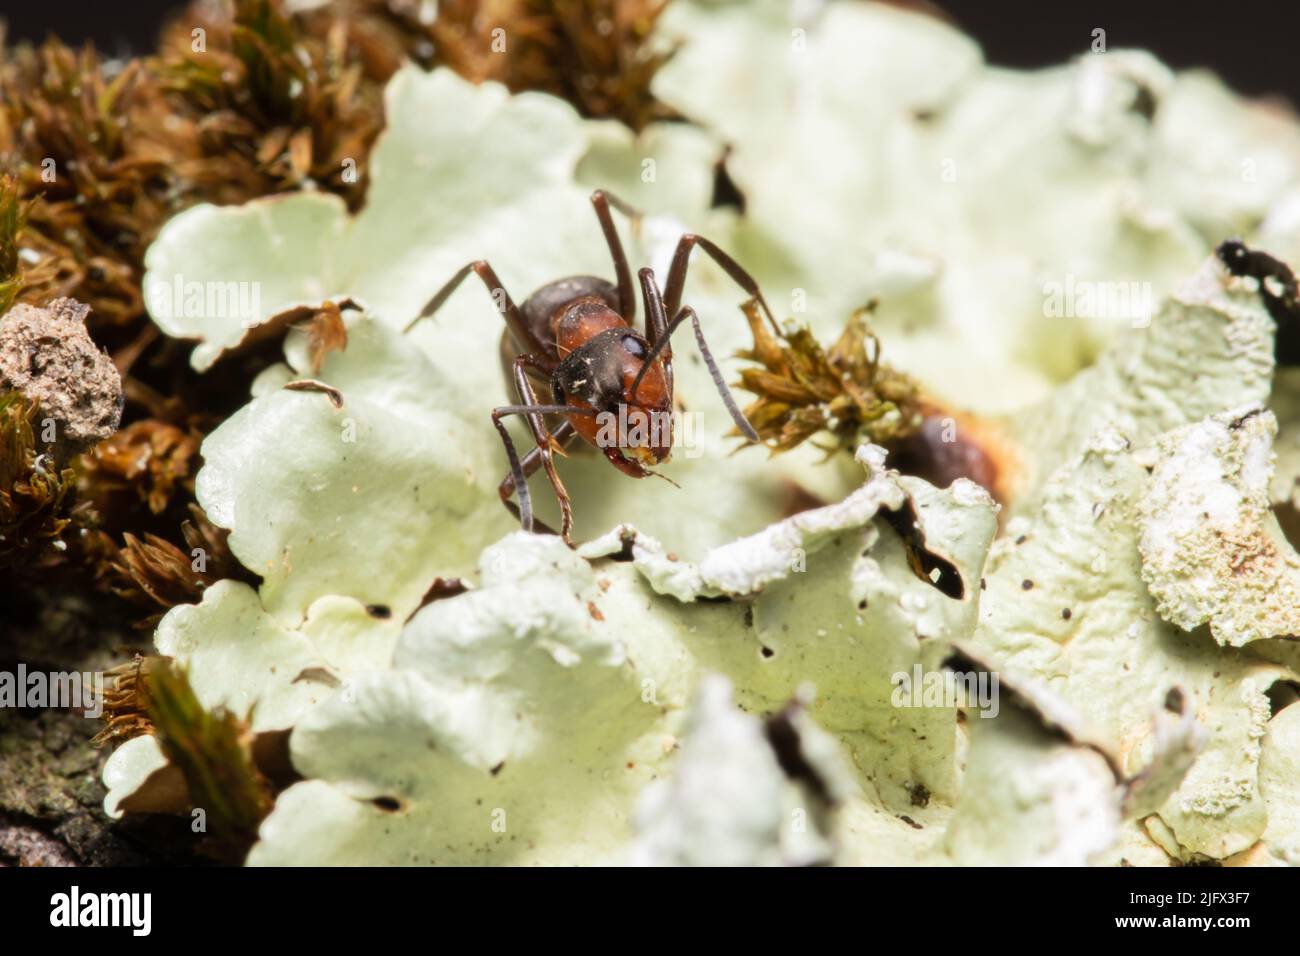 Formica rufa, also known as the red wood ant, southern wood ant, or horse ant. Stock Photo